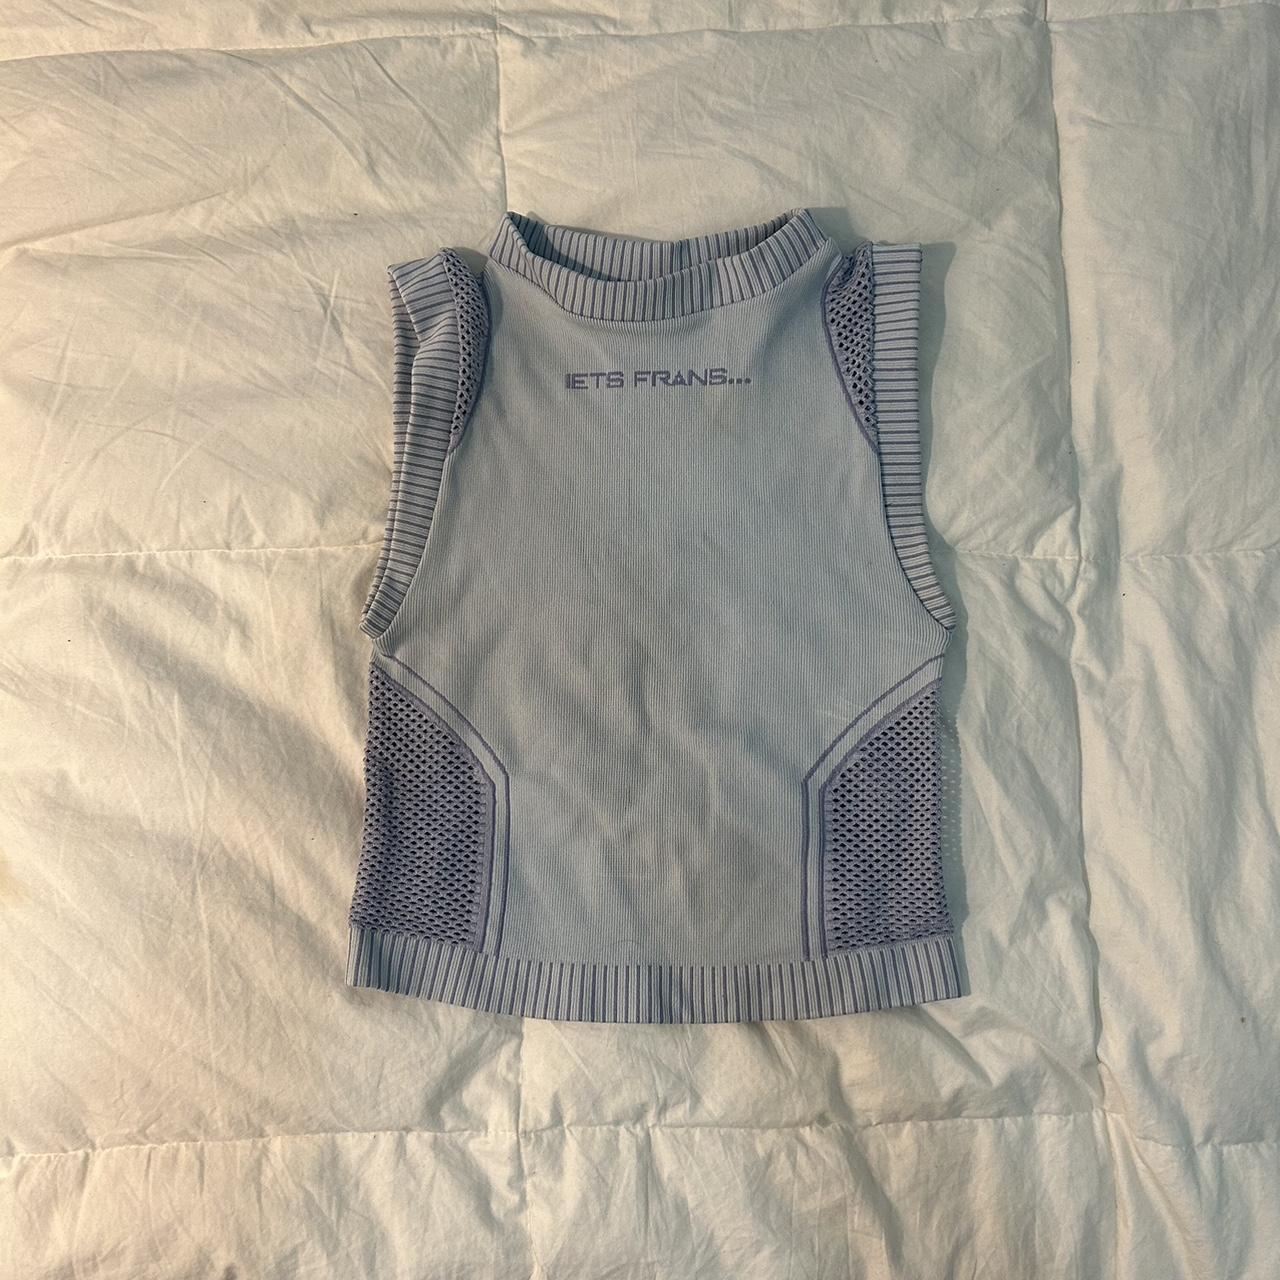 Urban Outfitters Women's Blue Crop-top